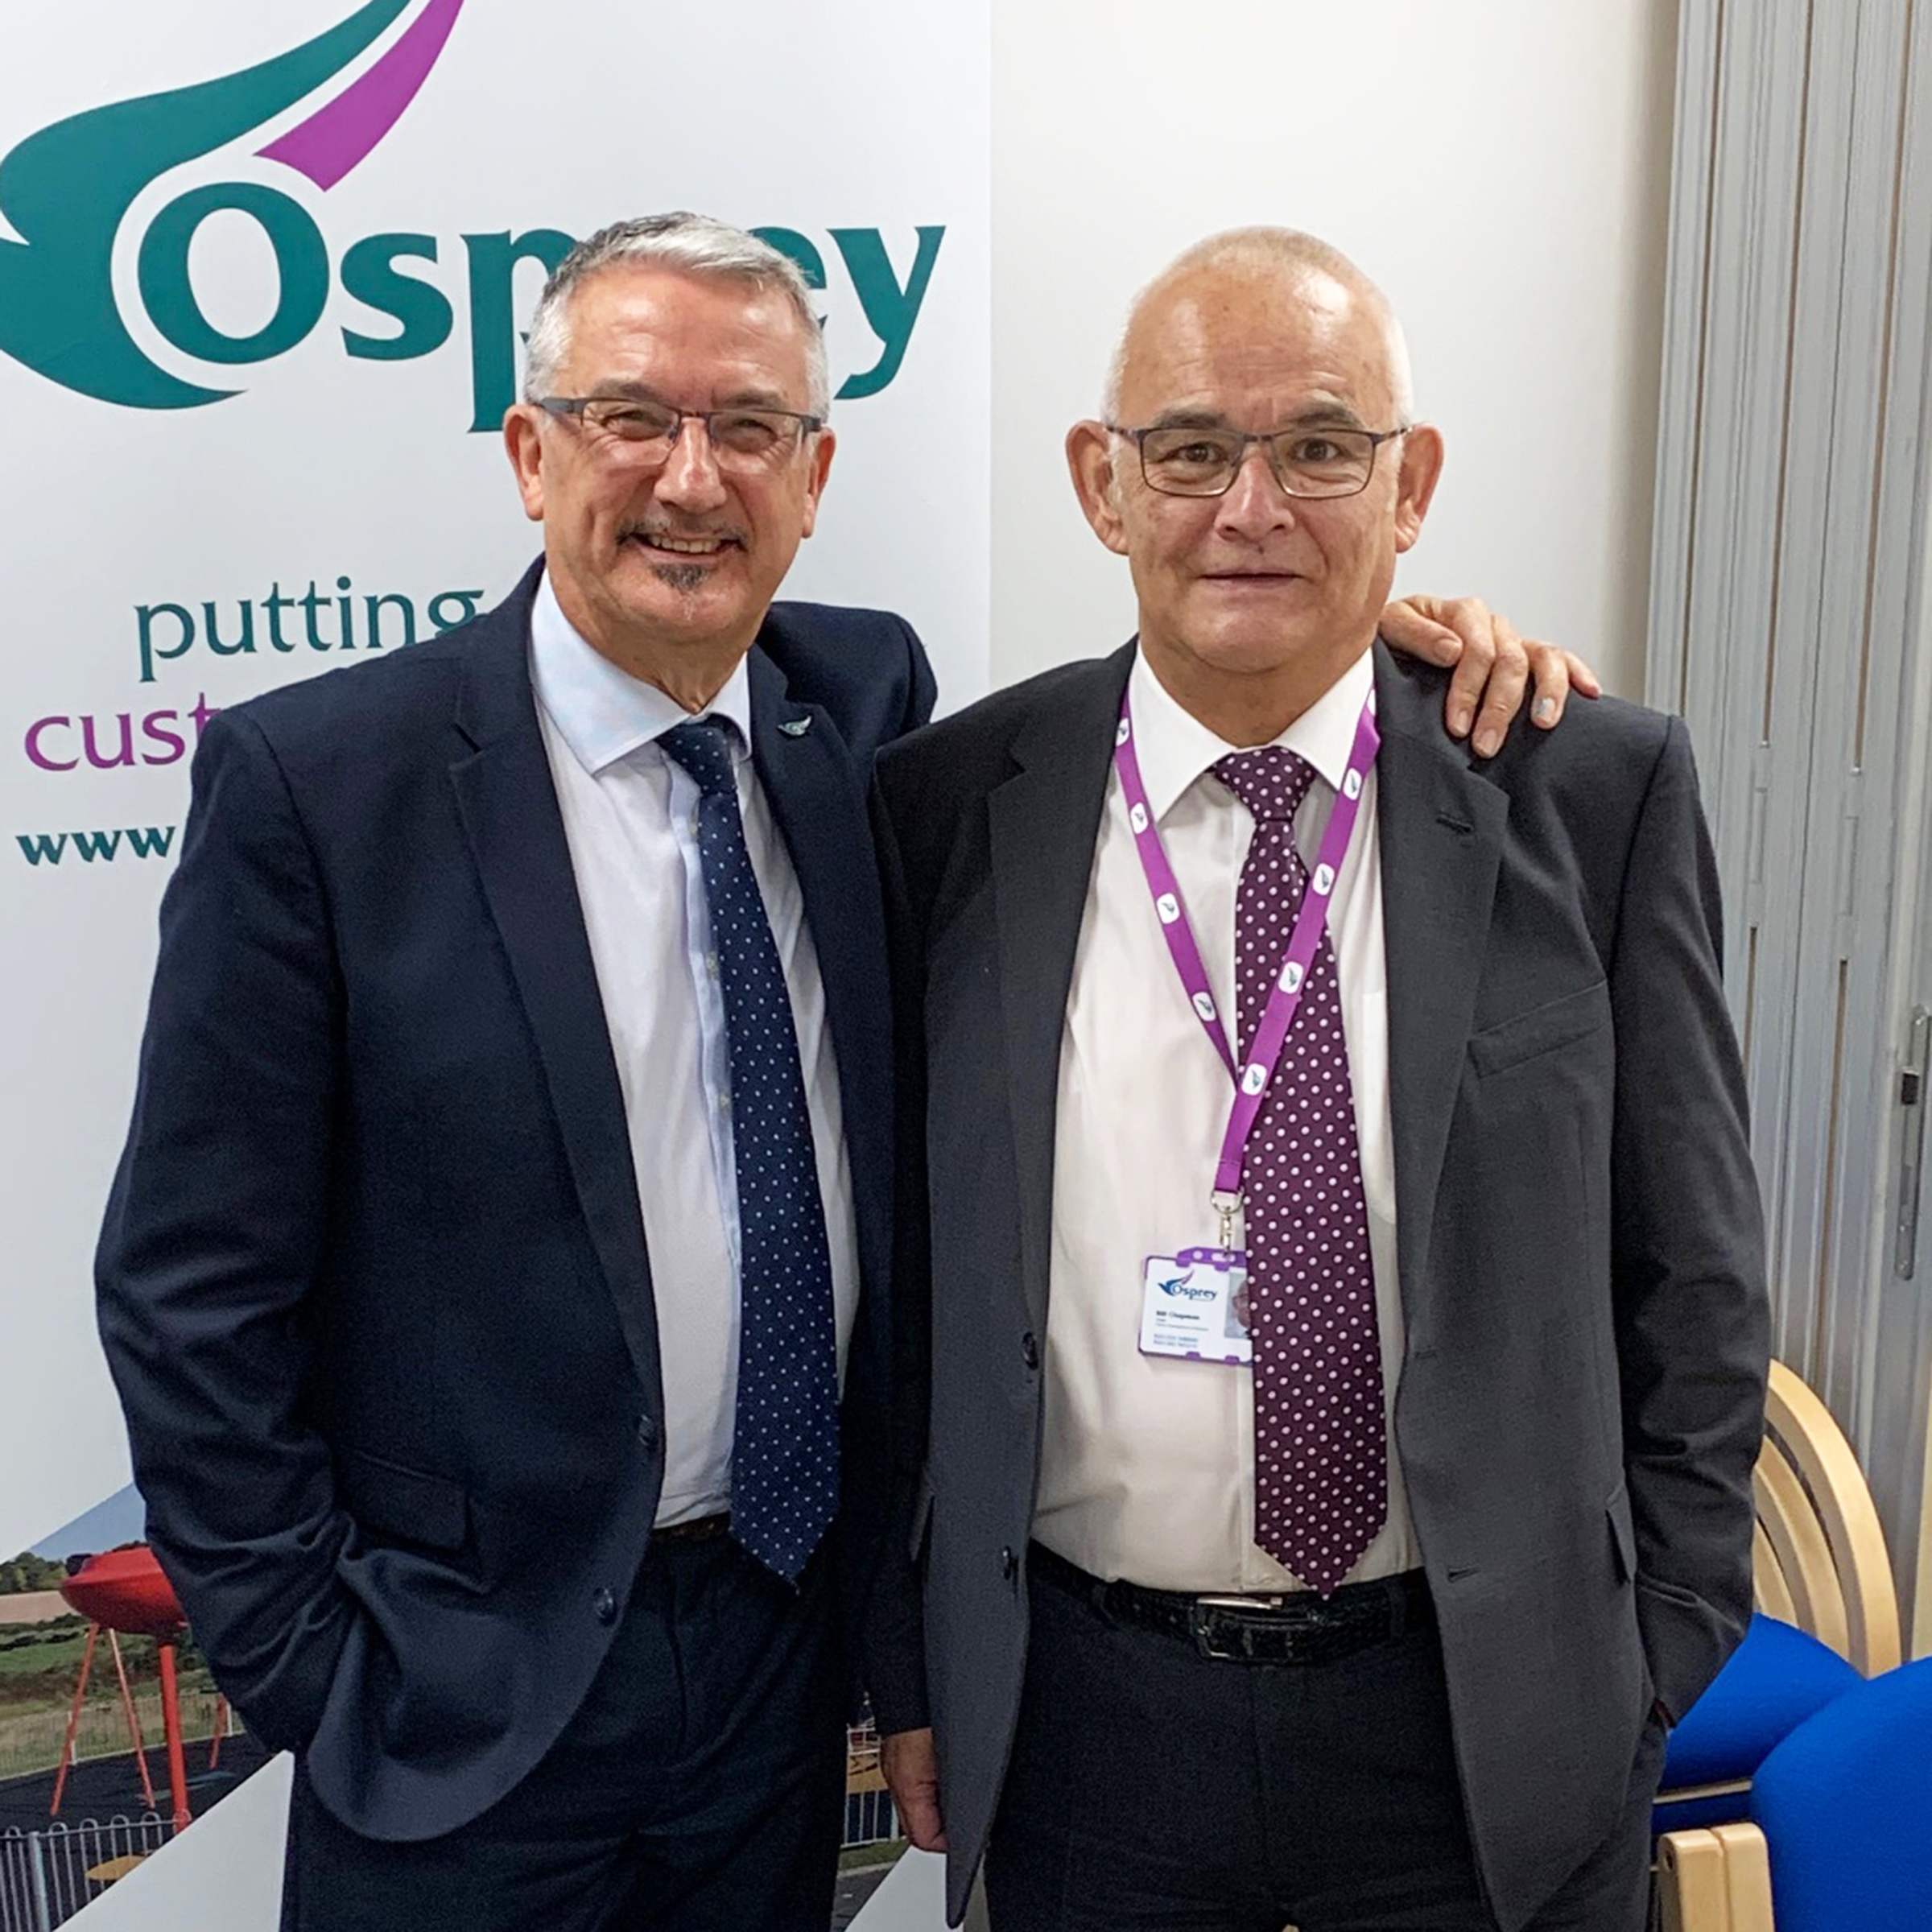 Bill Chapman steps down from Osprey Housing Group